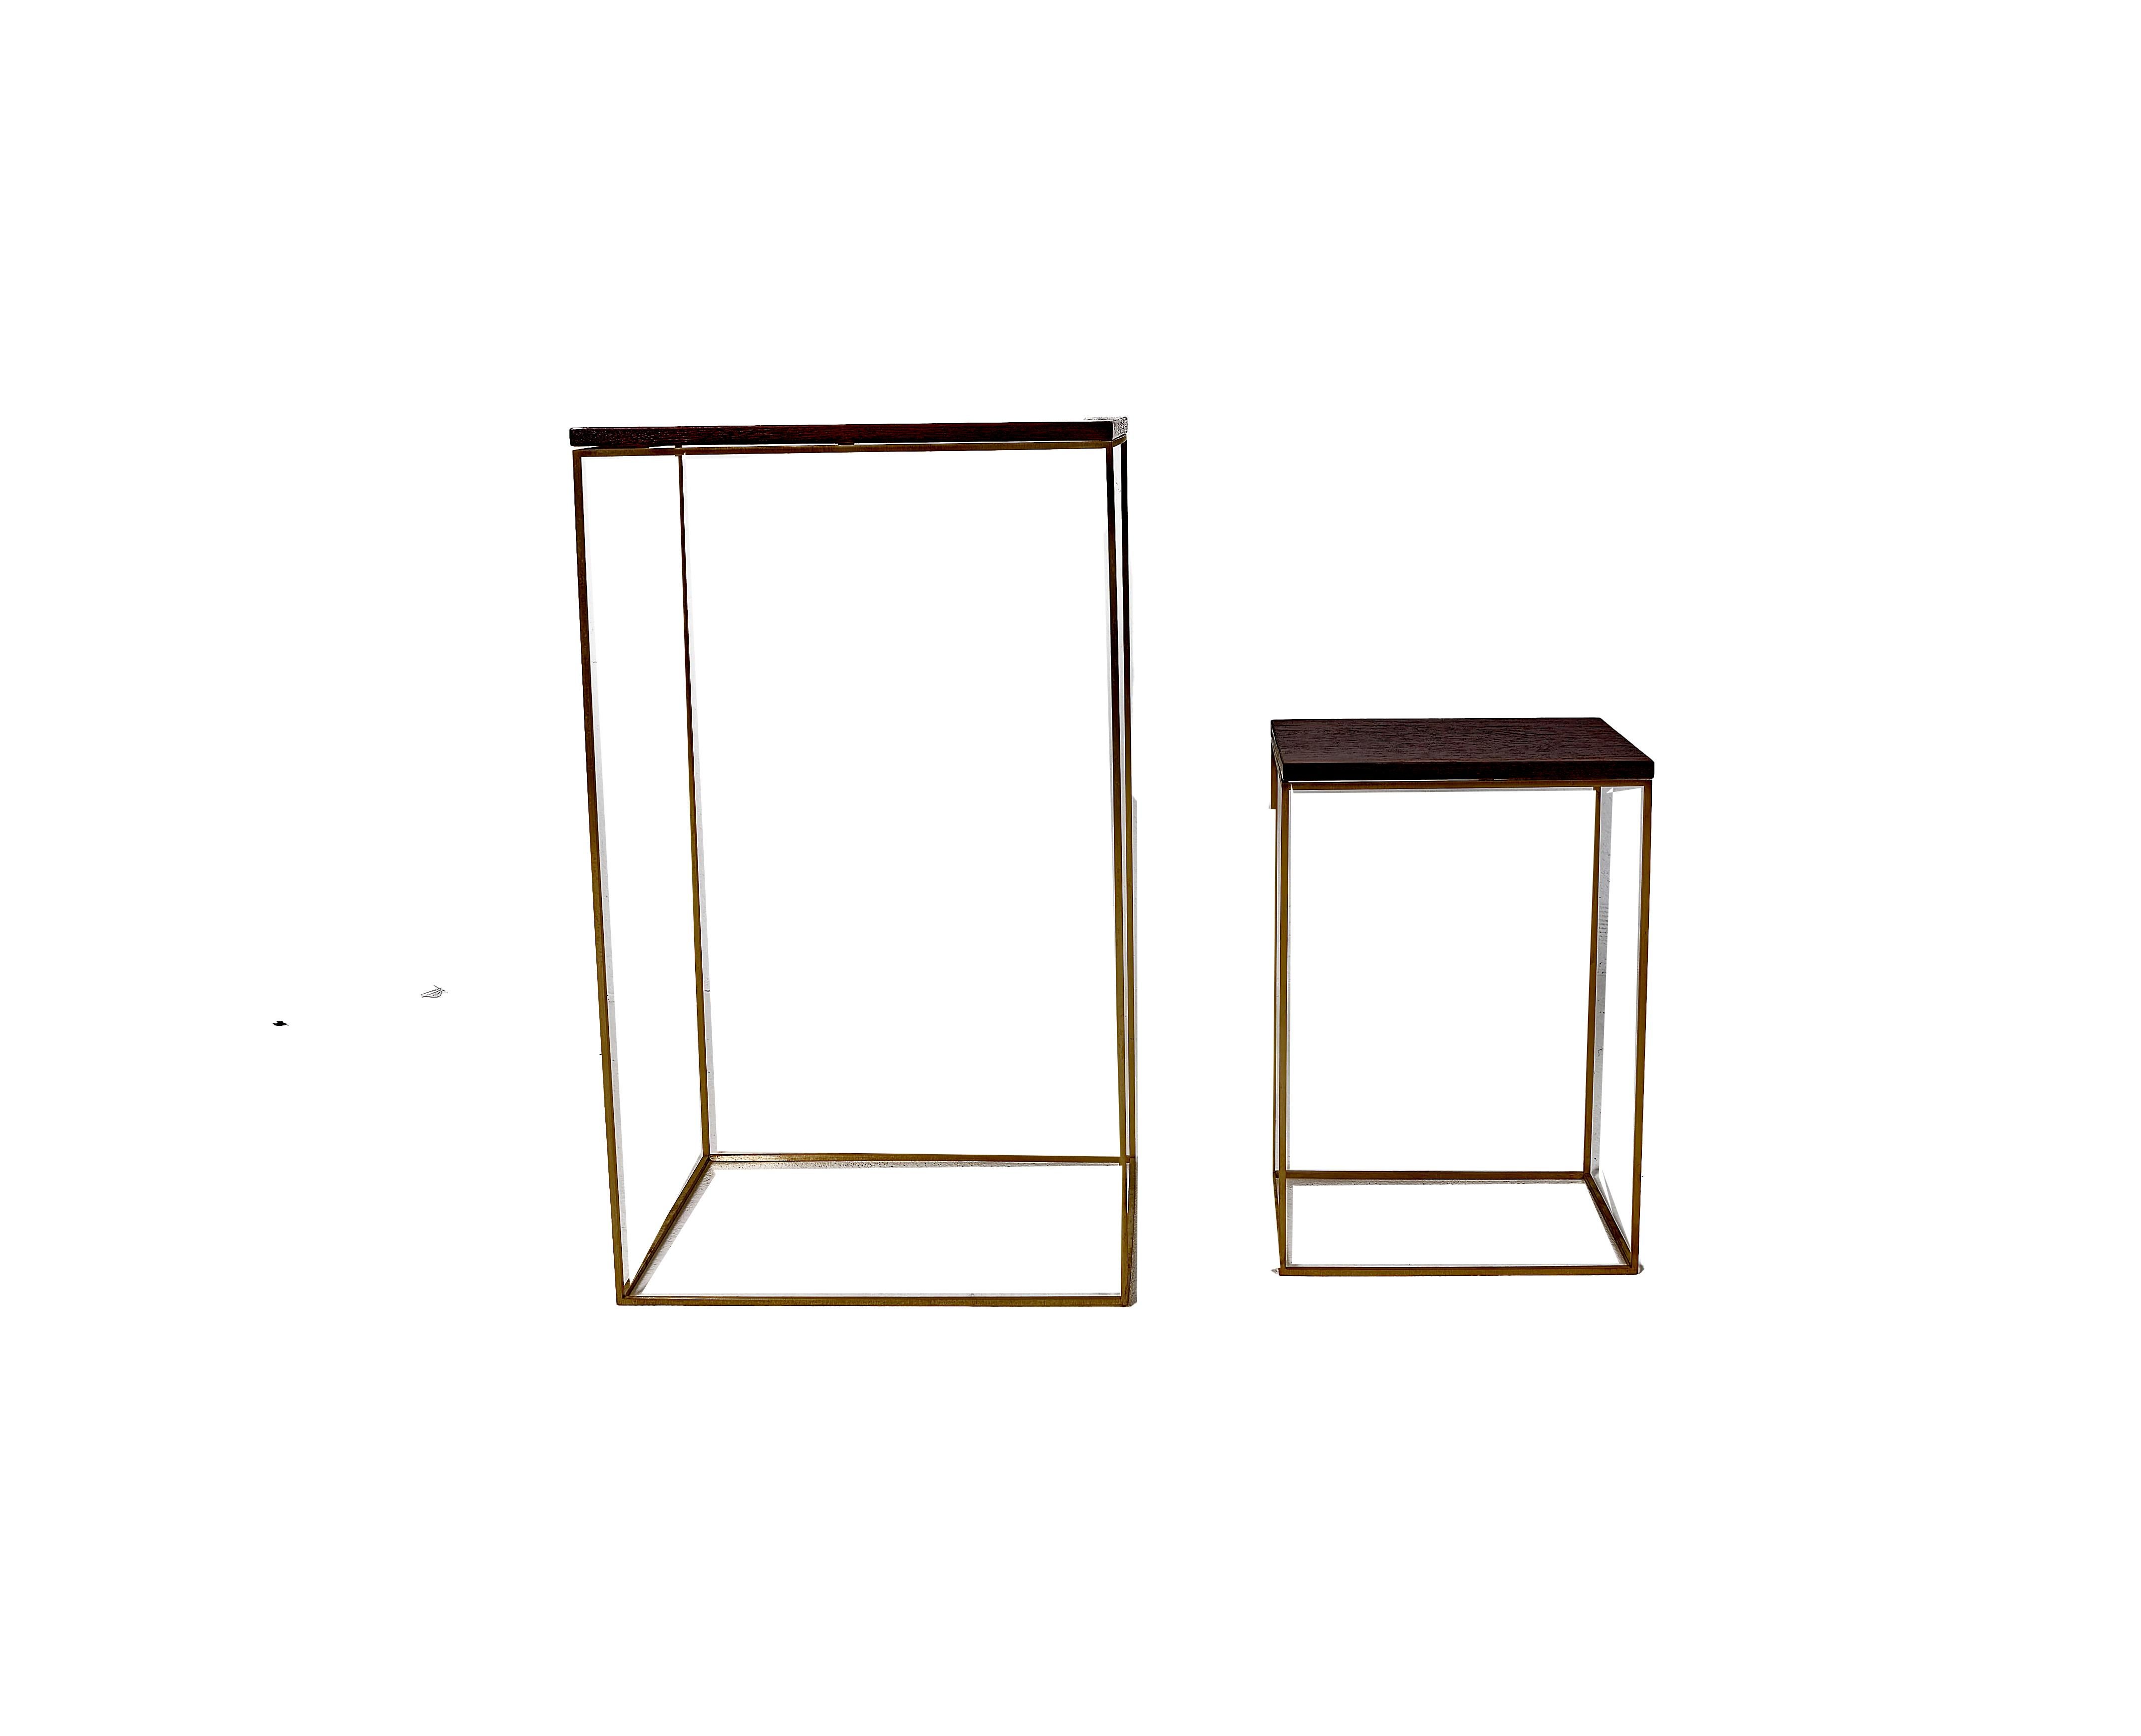 Walnut and Brass Side Tables. Fine lightweight tables with brass base and walnut veneered tops. Tops sit on base and are held in position by four pins. Tables are not built for heavy items, good for light lamps, books and sculptures.
In total 3